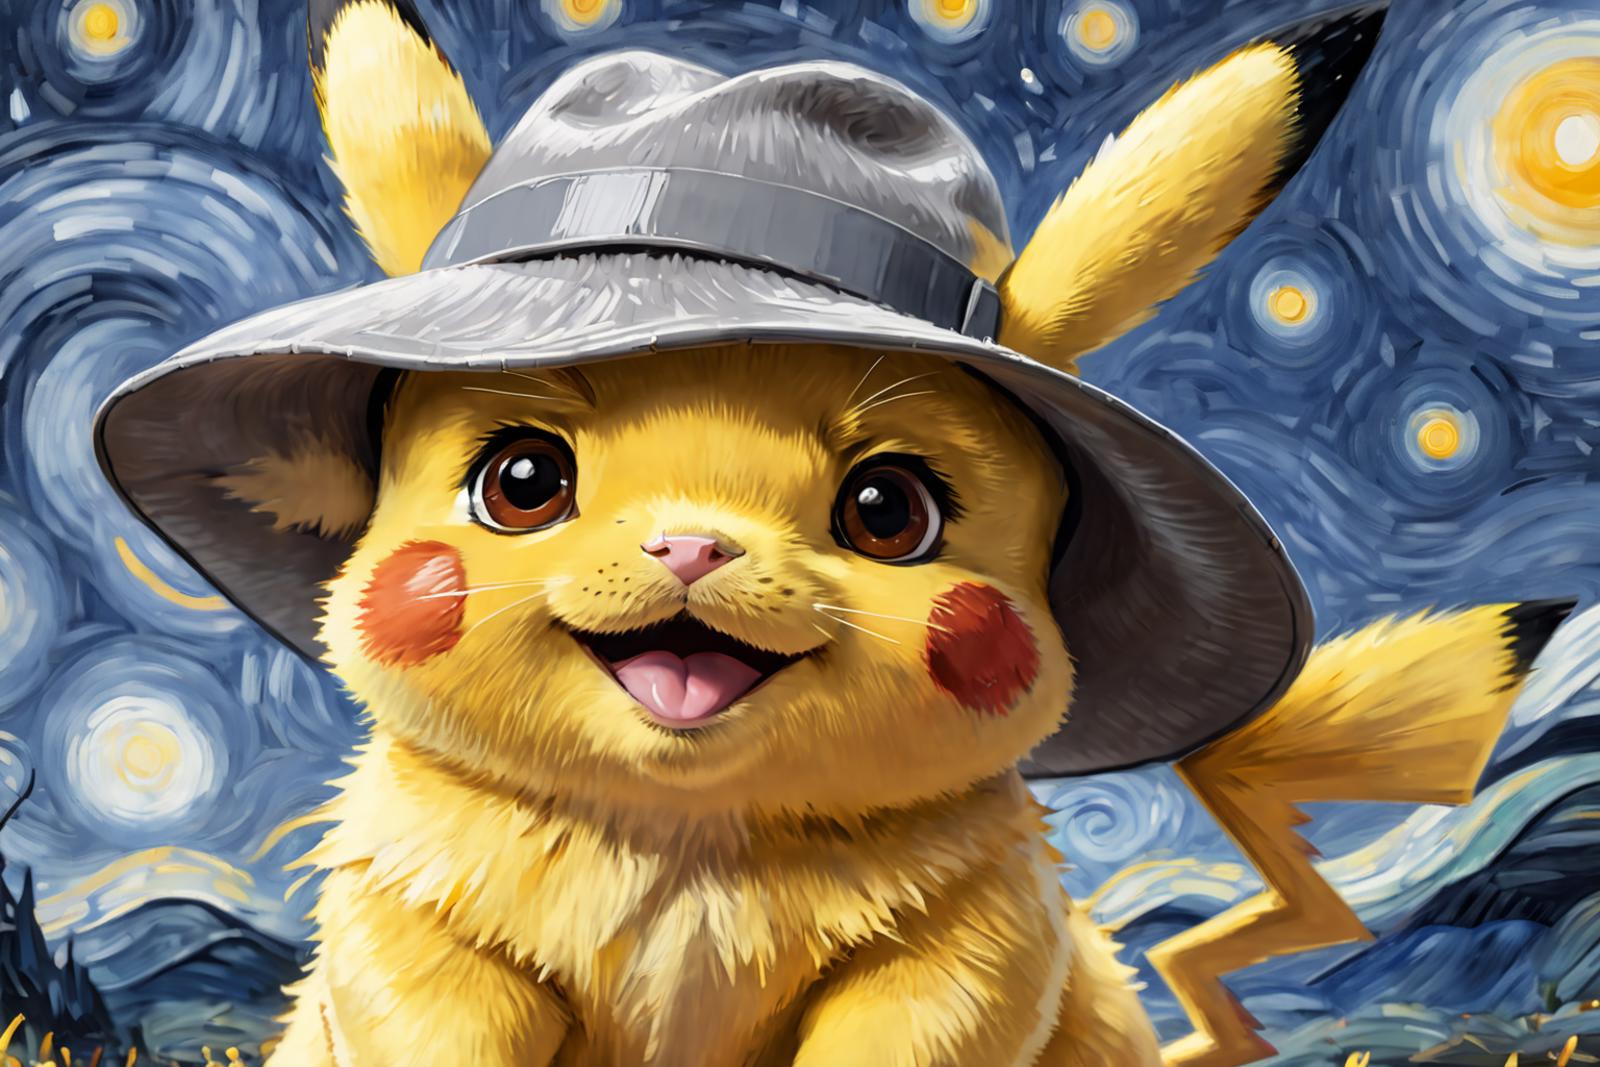 A Pikachu wearing a hat and smiling, with the night sky in the background.